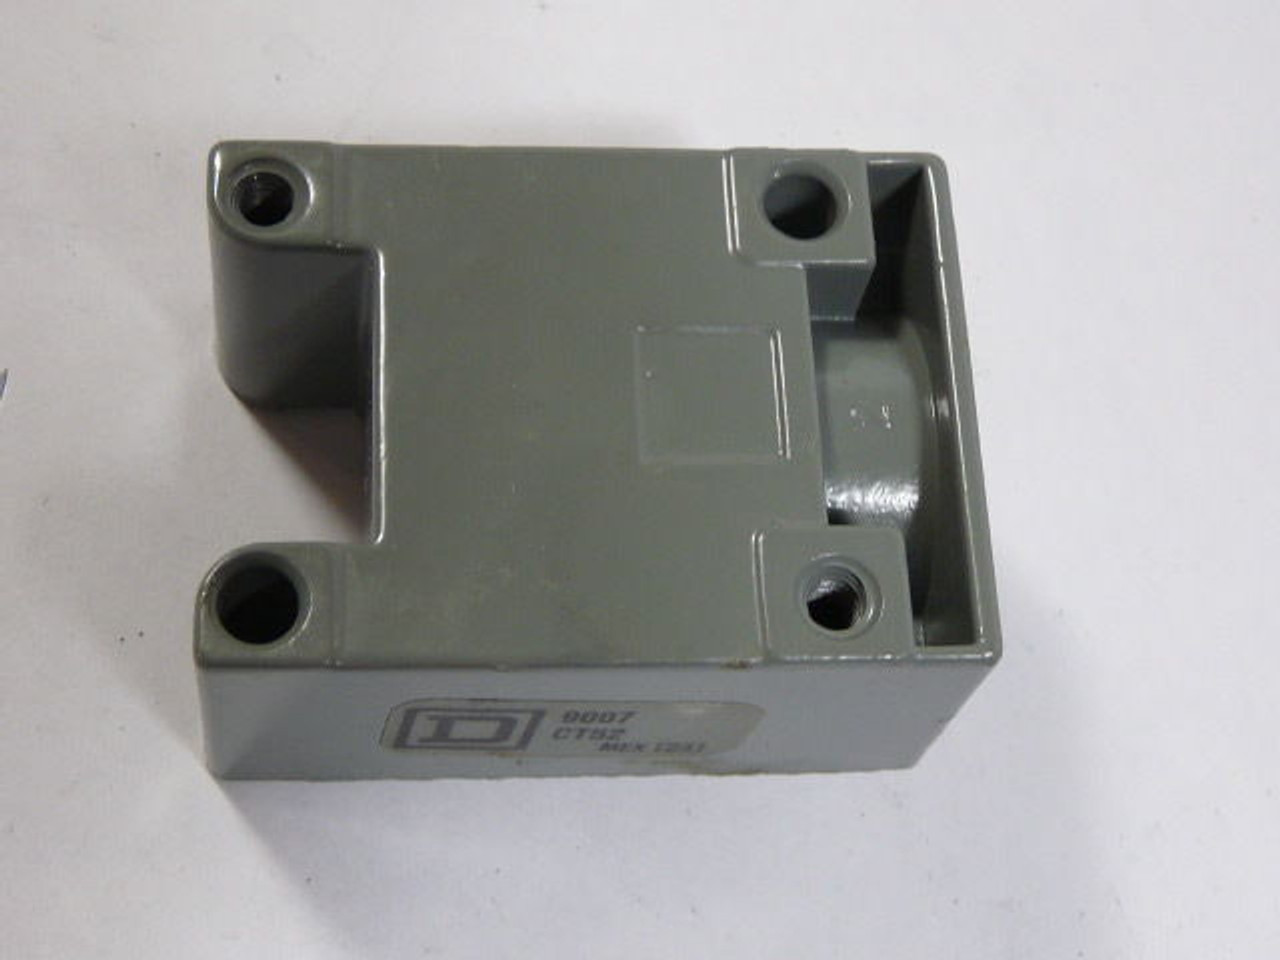 Square D 9007-CT52 Limit Switch Receptacle 1/2"14 NPT 1NO 1NC USED